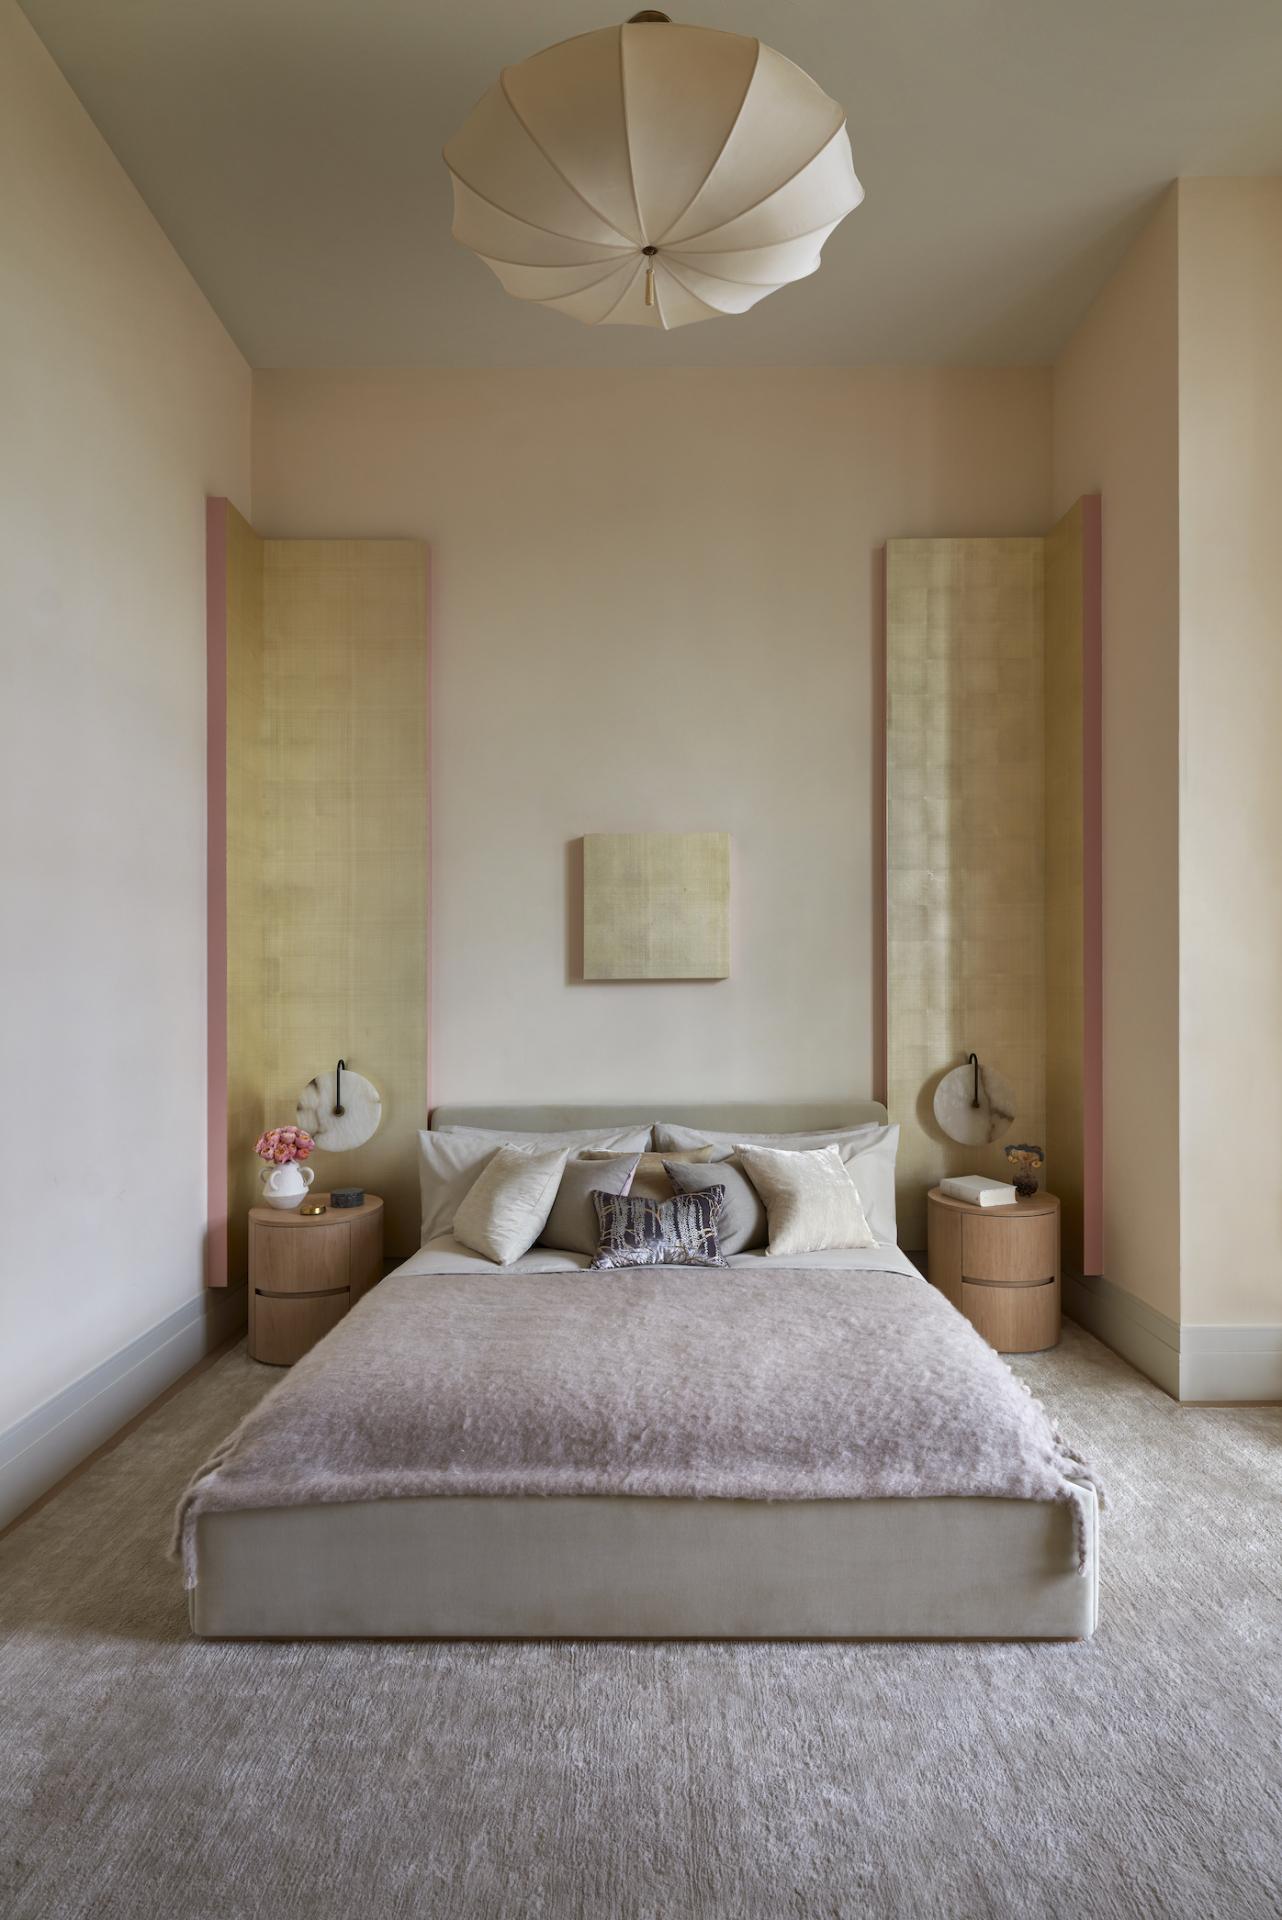 Esteemed NYC Interior Designer Kelly Behun Crafts The Whiteley London's First Show Apartment